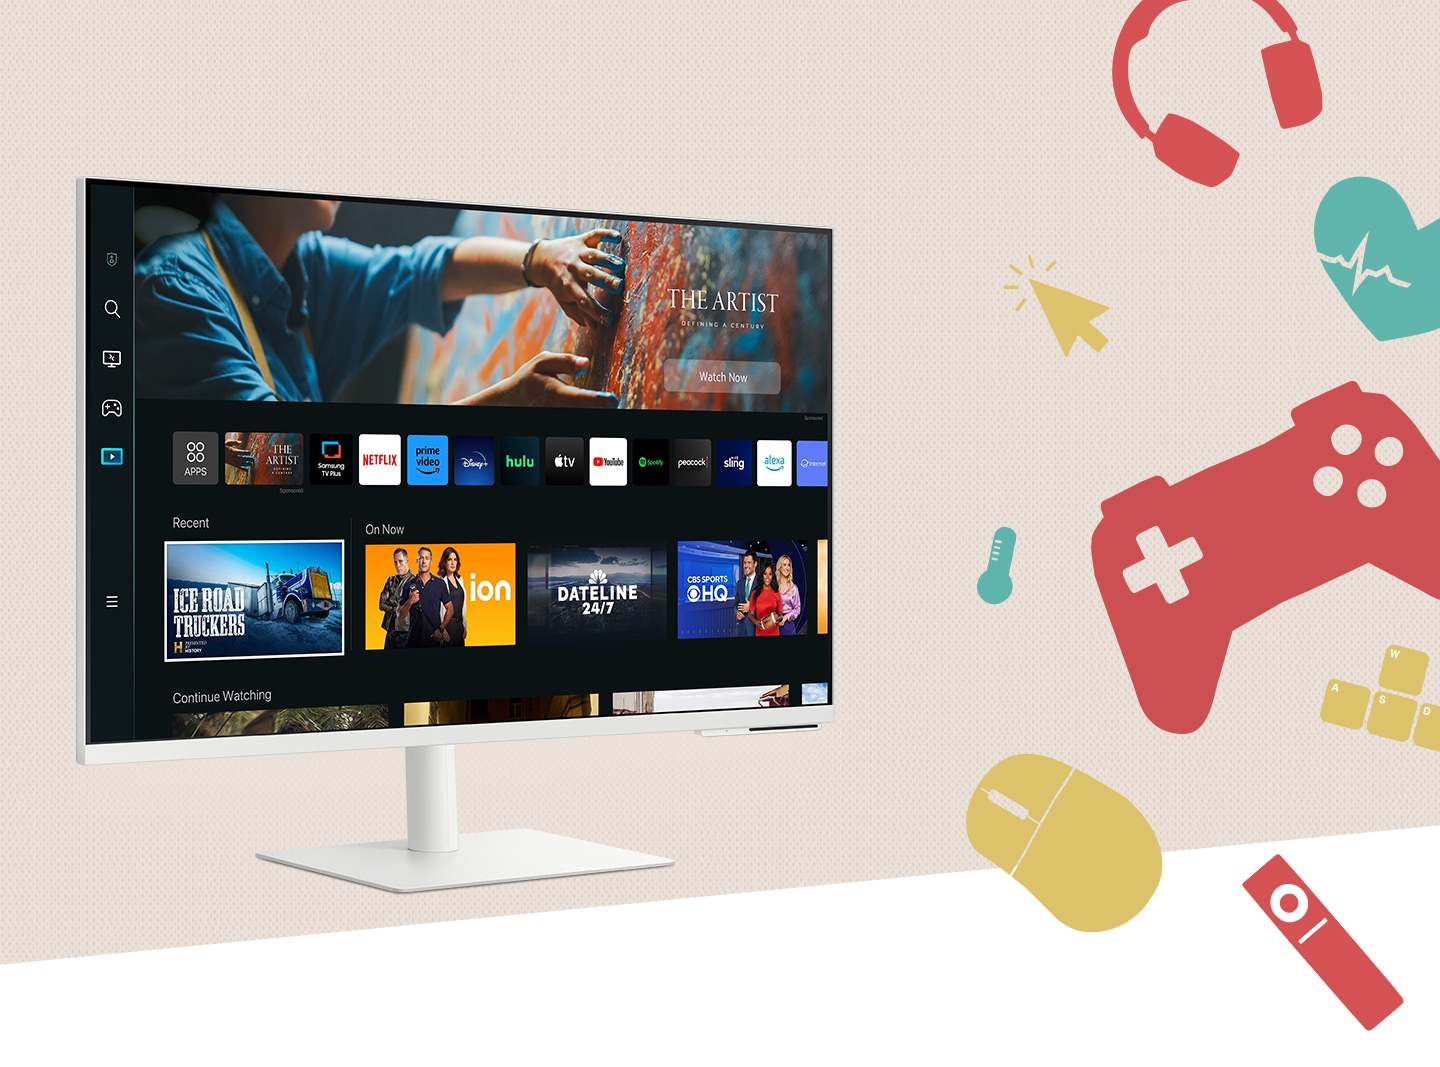 There is a Smart Monitor M7 with its Media Hub UI on it.